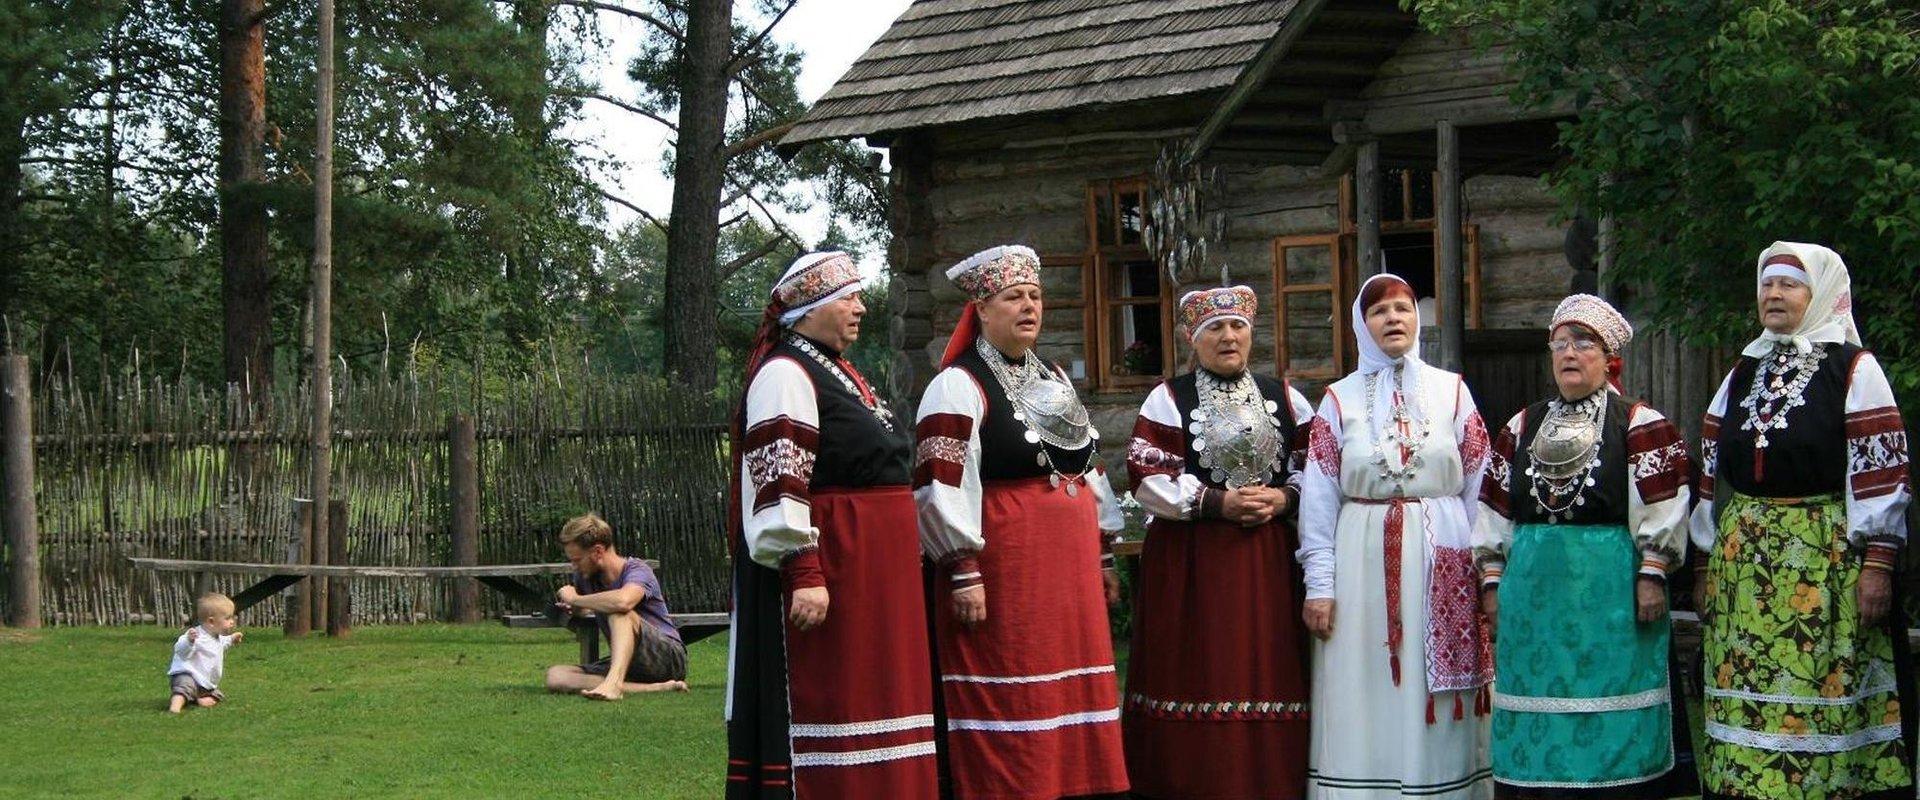 Experience tour of Southern Estonia and Setomaa, Setos in folk costumes singing in a traditional singing style (leelo)